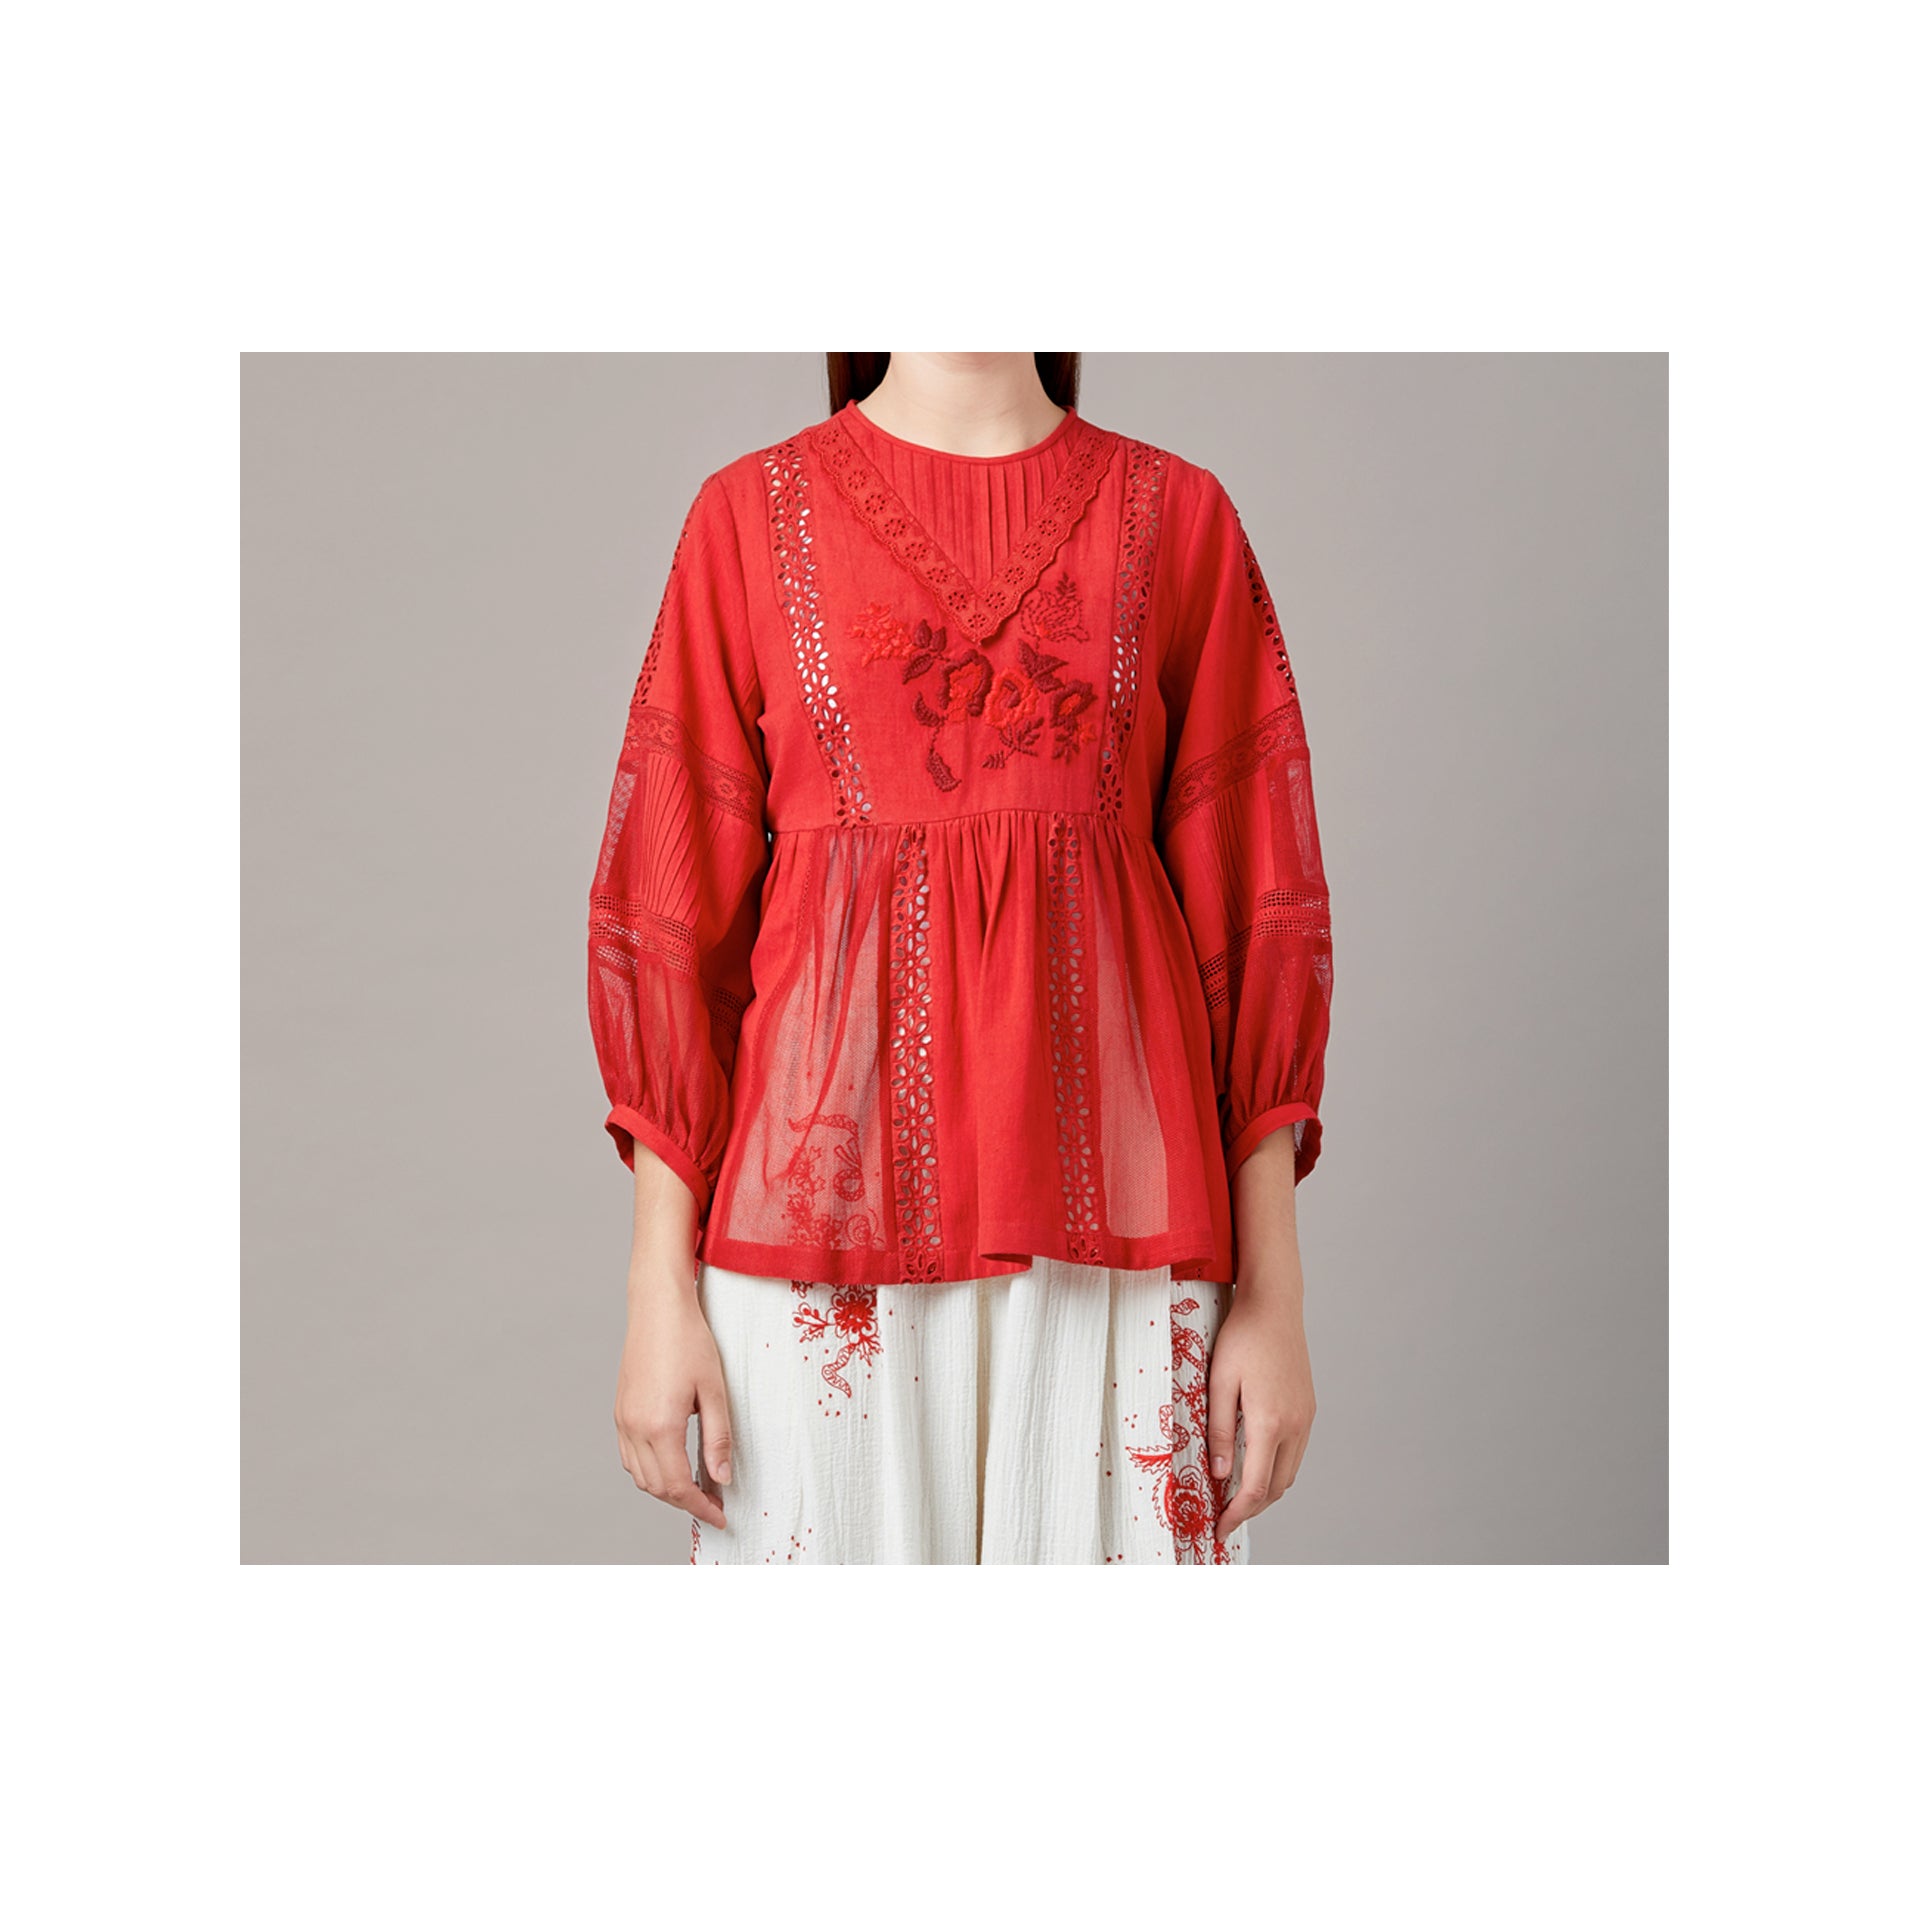 The Maria Top- Pants Set - Red Broderie Anglaise Embroidery